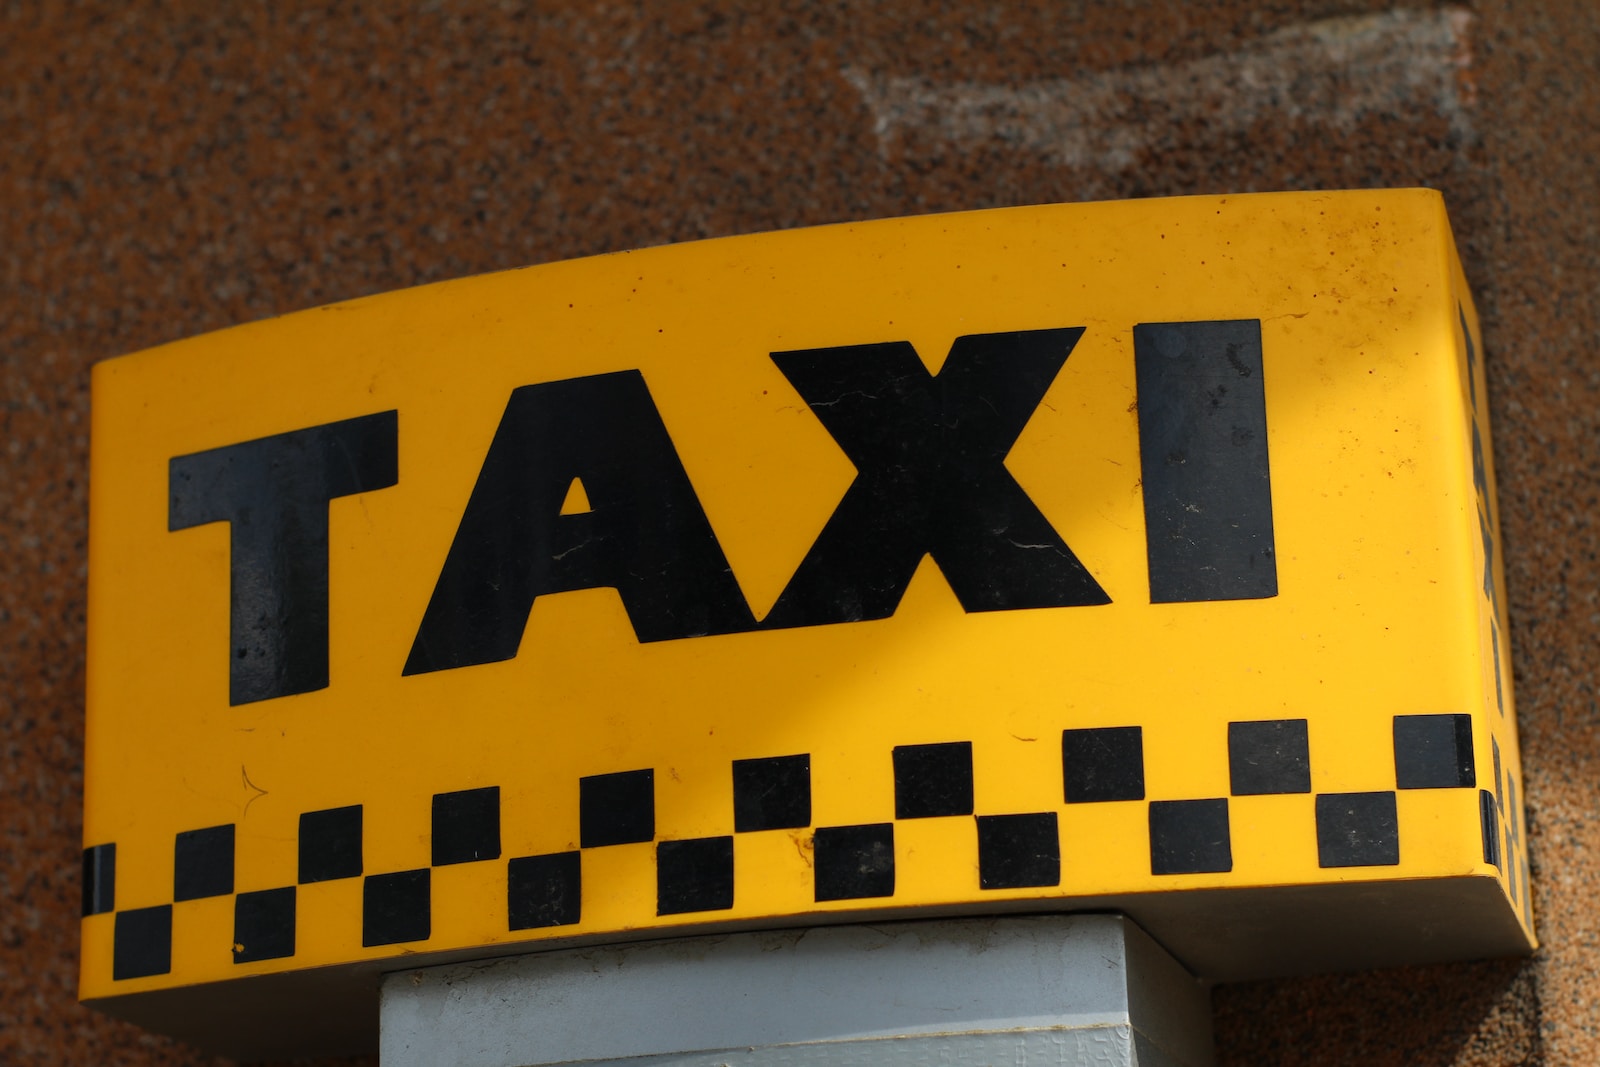 About us page of Taxi service srinagar